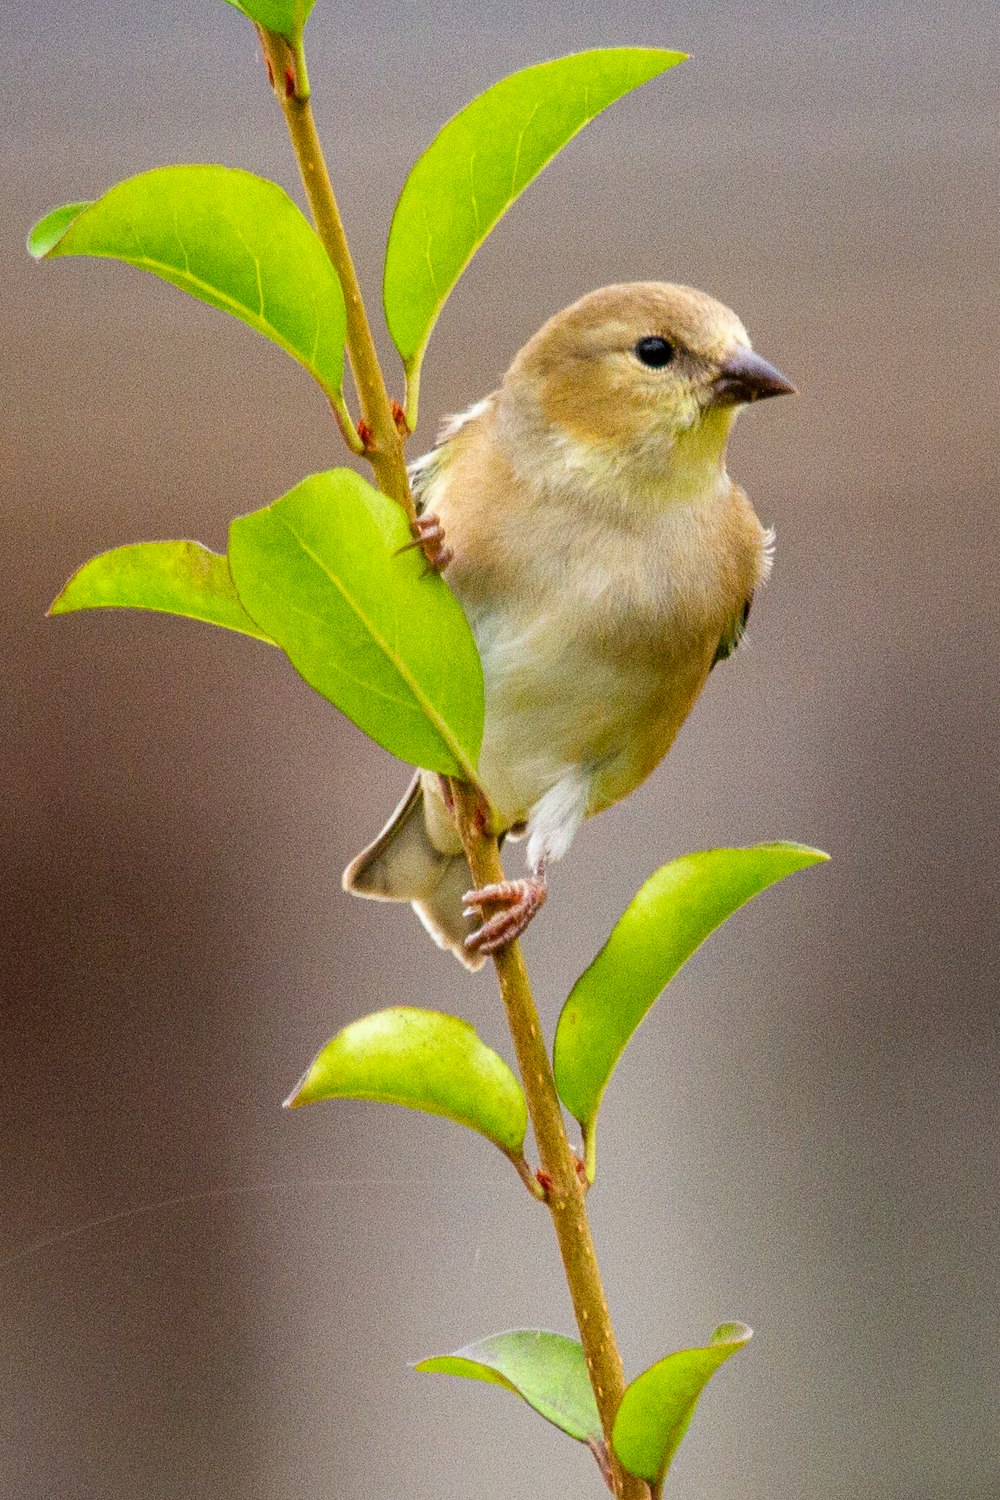 yellow bird perched on green leaf